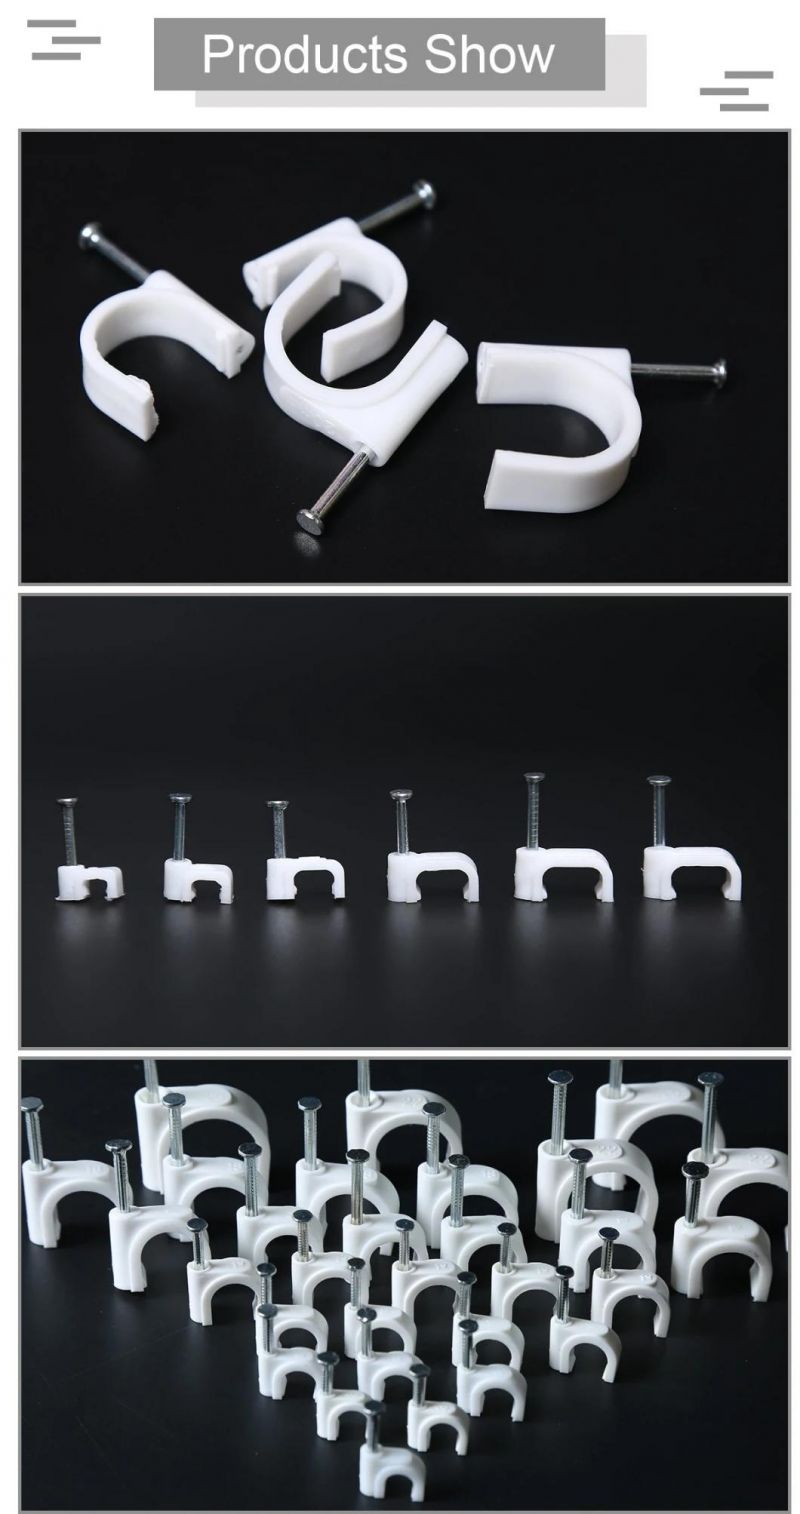 5 mm Plastic PE Flat Wire Nail Cable Clip